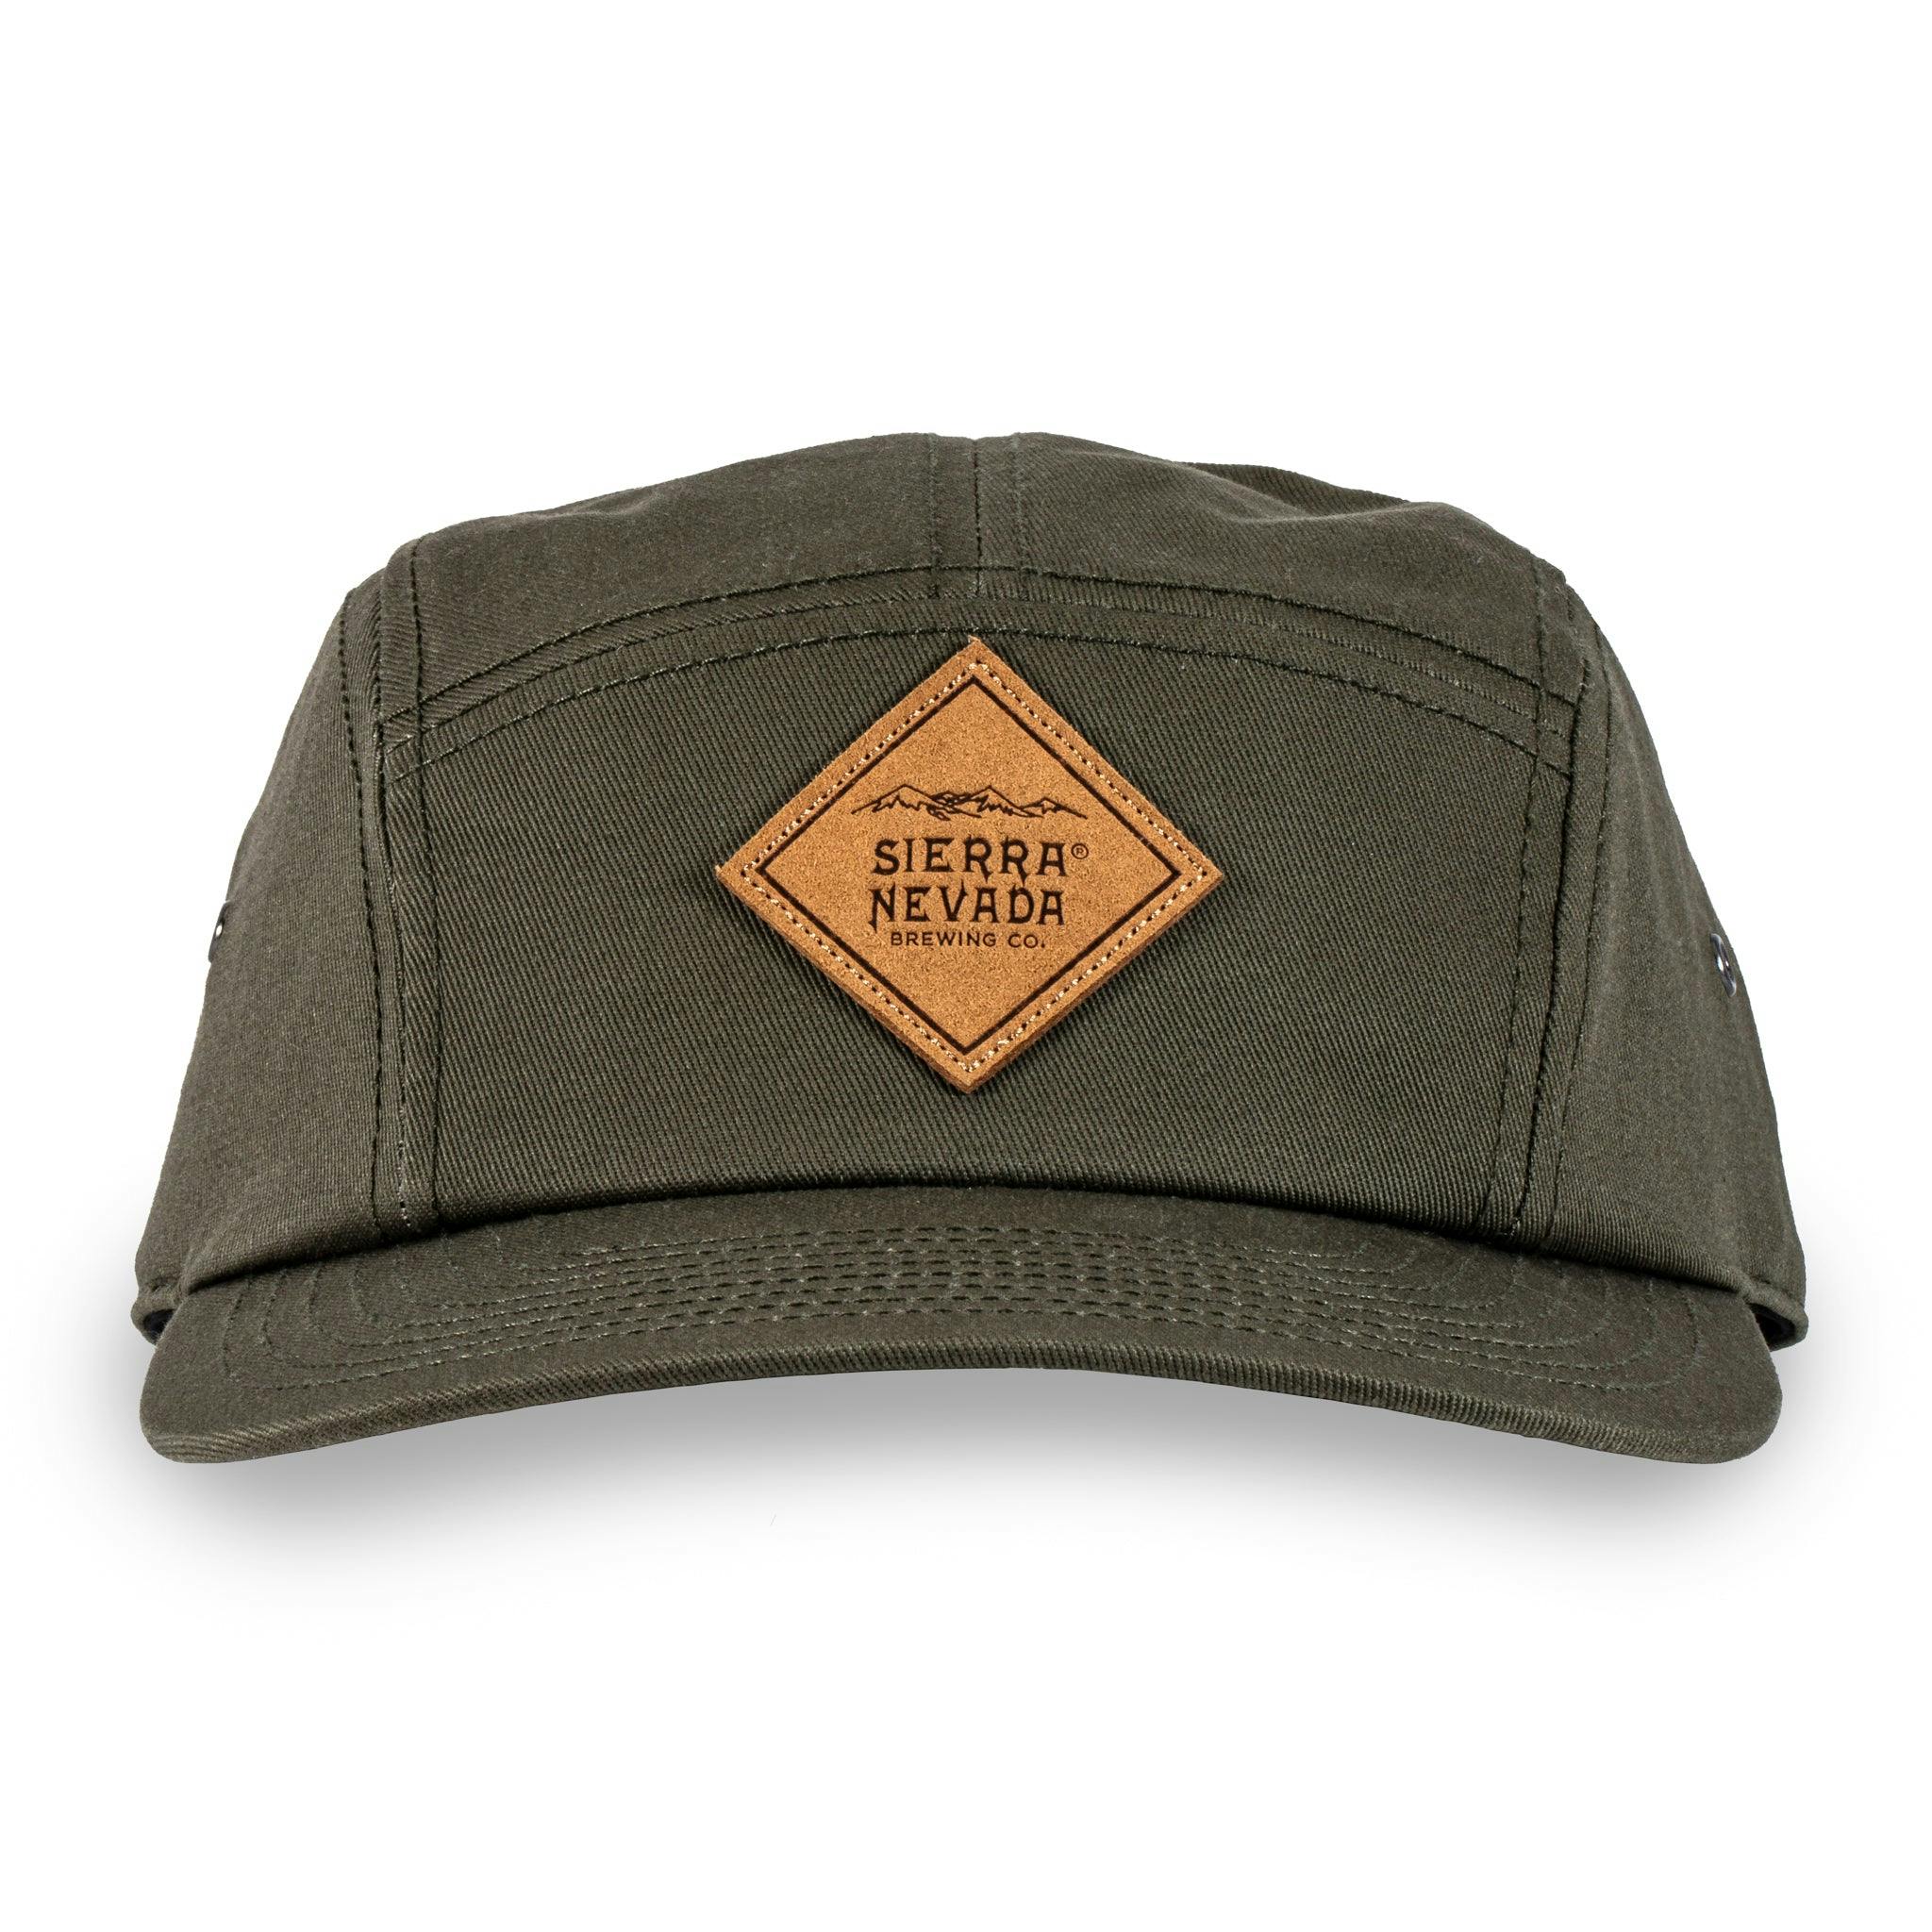 Straight on, front view of the Sierra Nevada diamond patch green camper hat